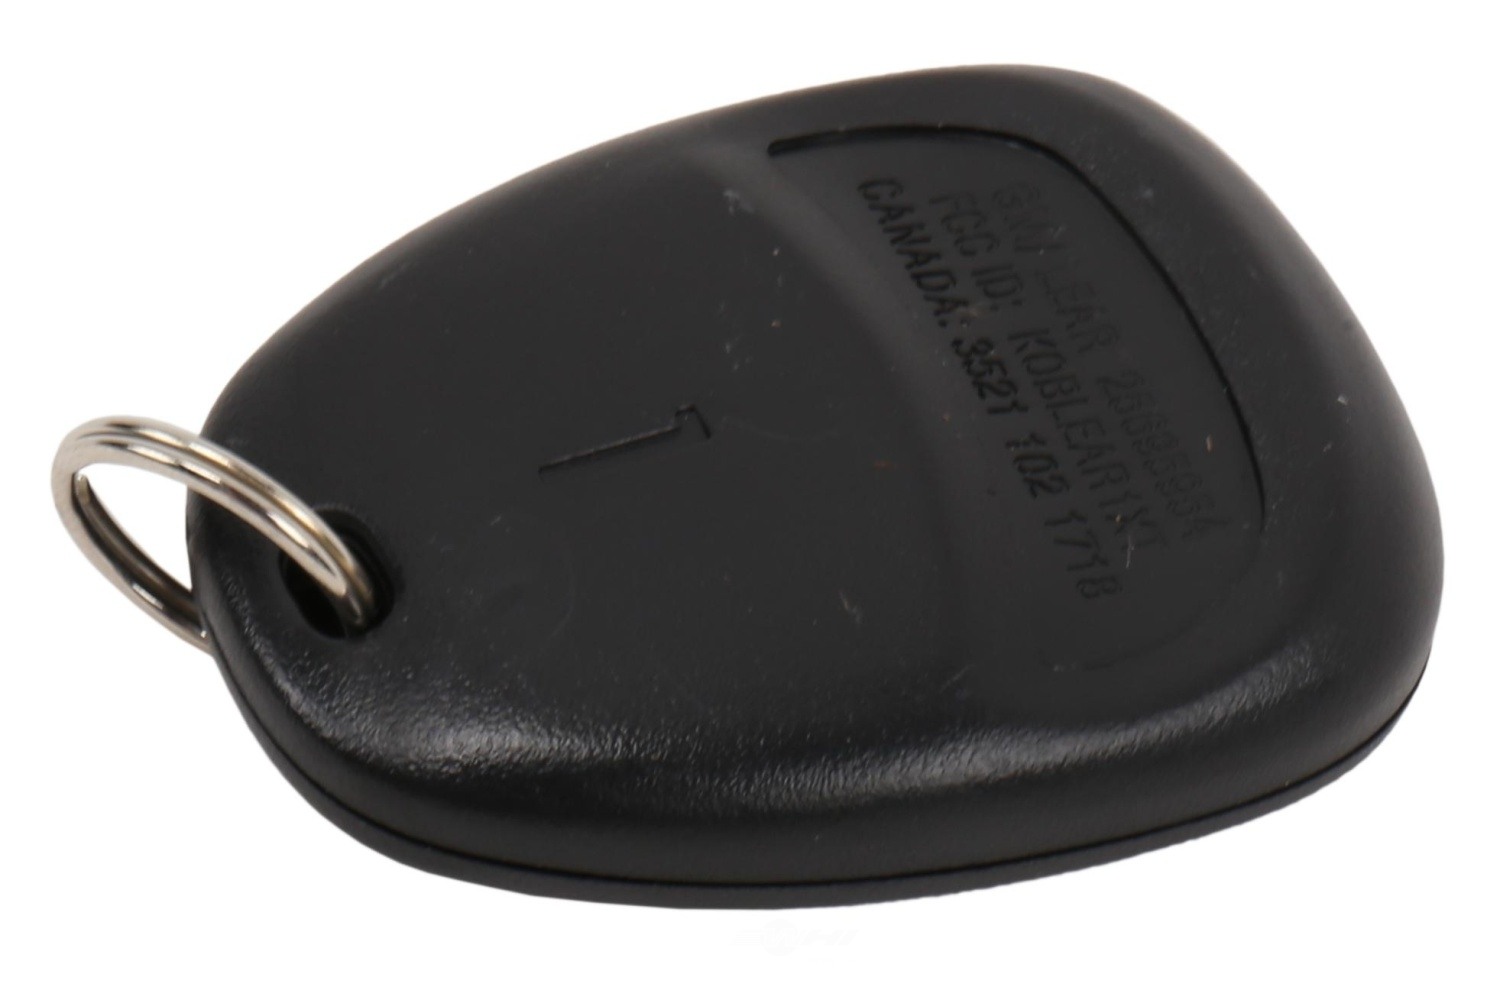 GM GENUINE PARTS - Keyless Entry Transmitter - GMP 25695954